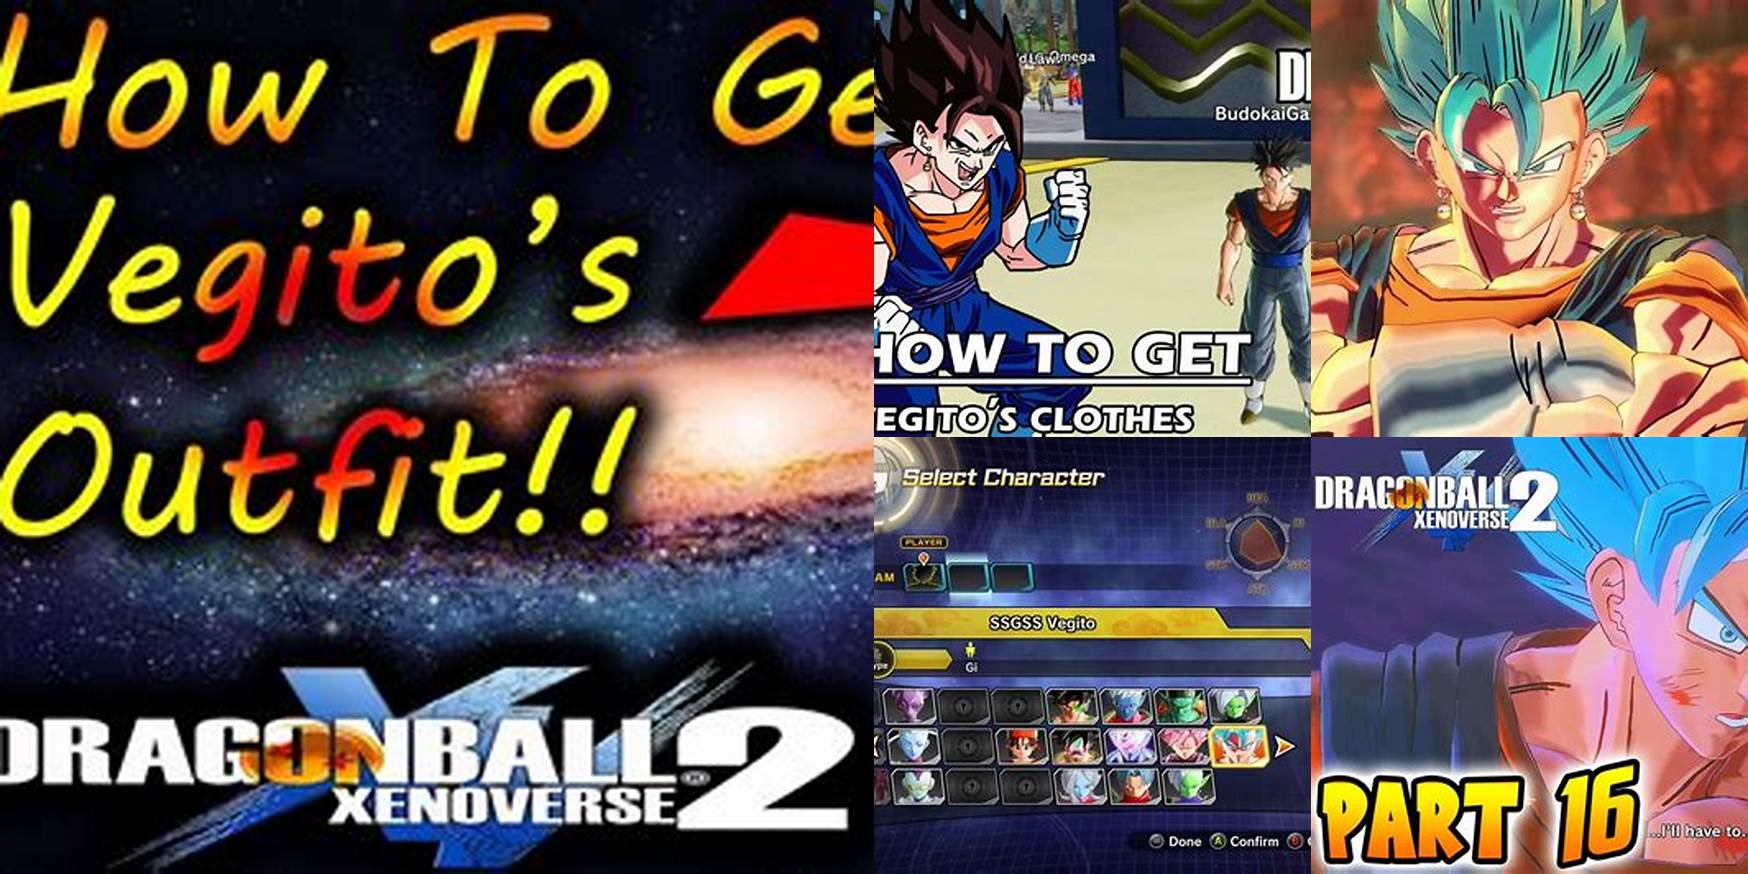 How To Get Vegito's Clothes In Xenoverse 2